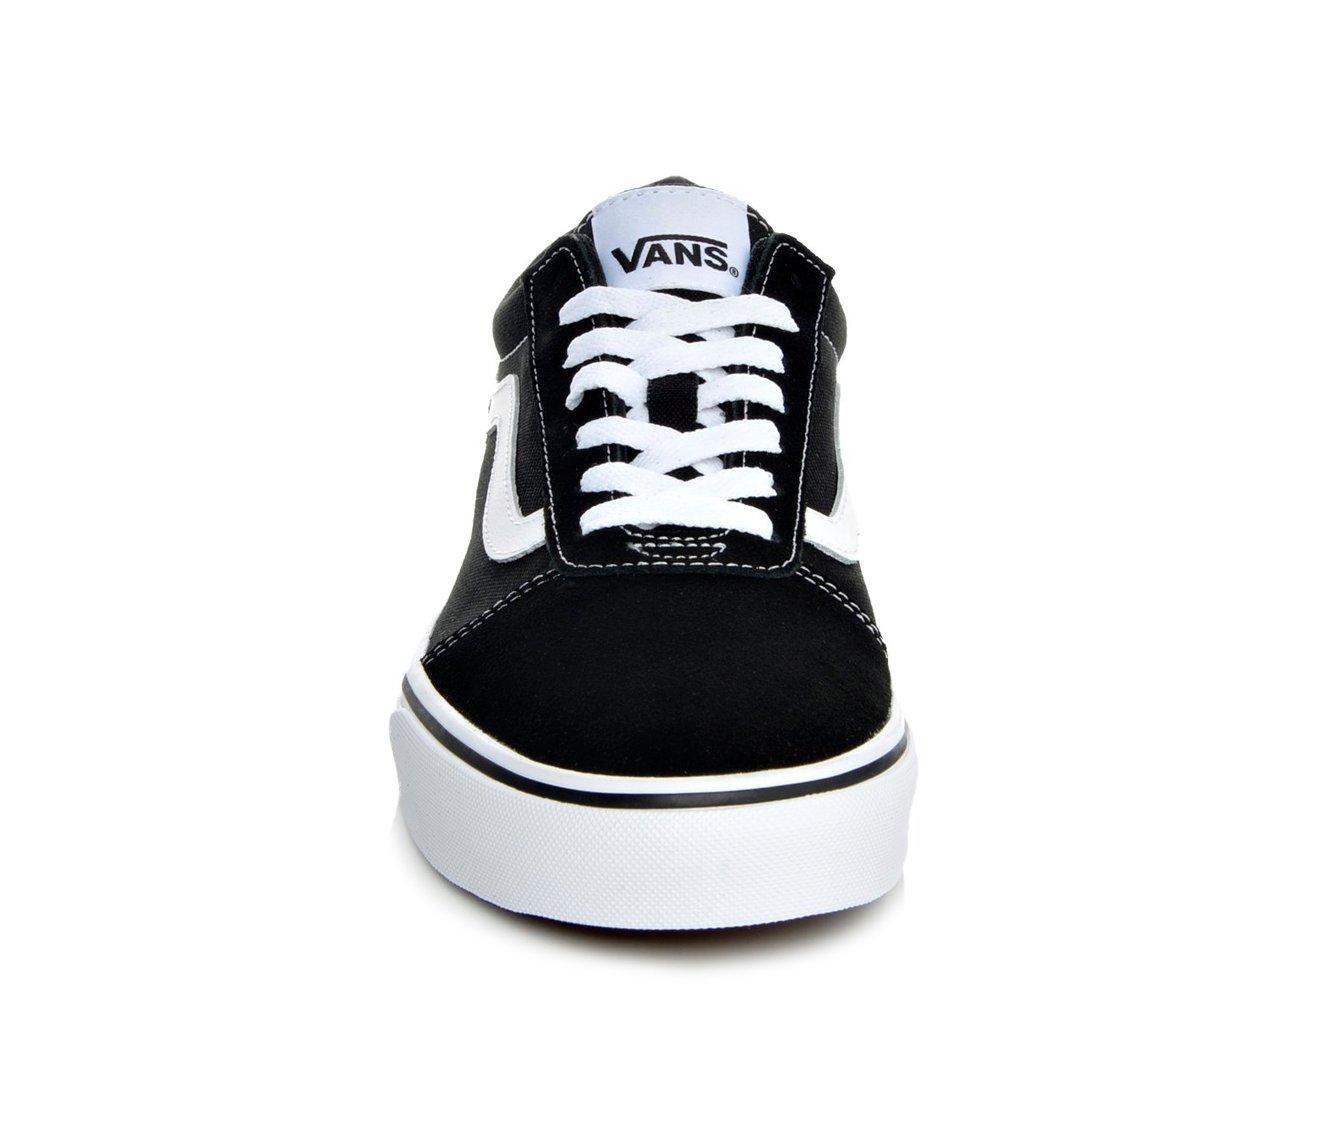 15 NEW Ways to Style Vans Sneakers, Men's Fashion